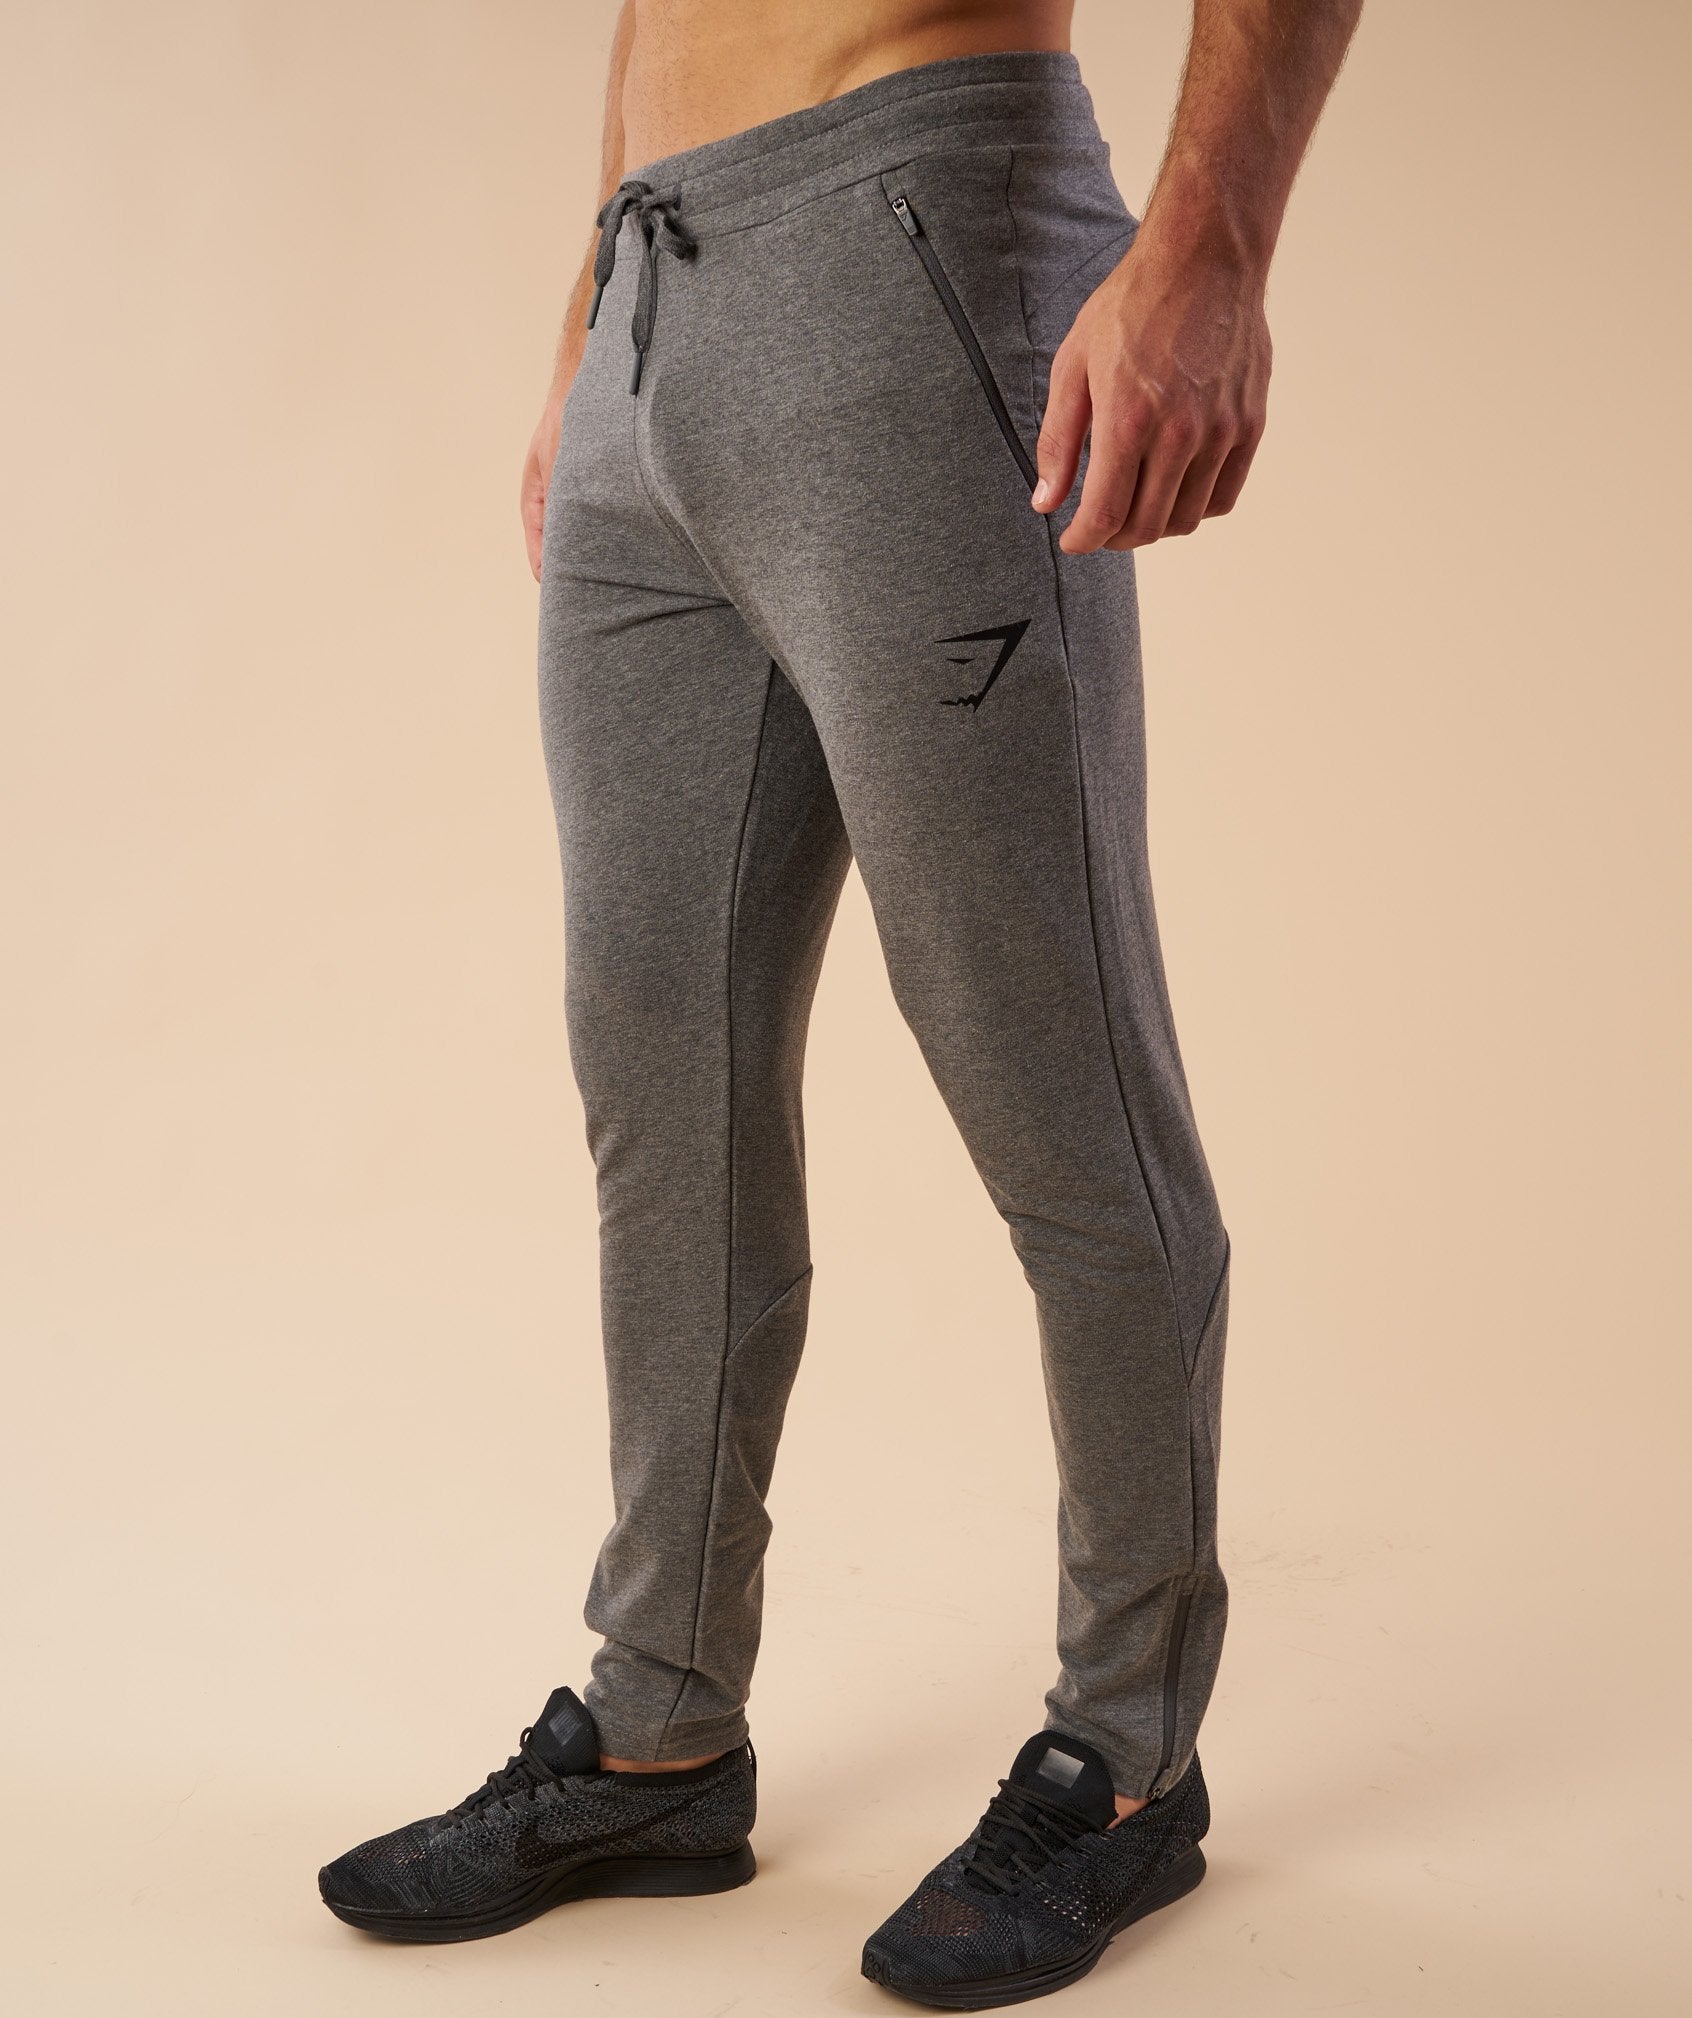 Fit Tapered Bottoms in Charcoal Marl - view 4